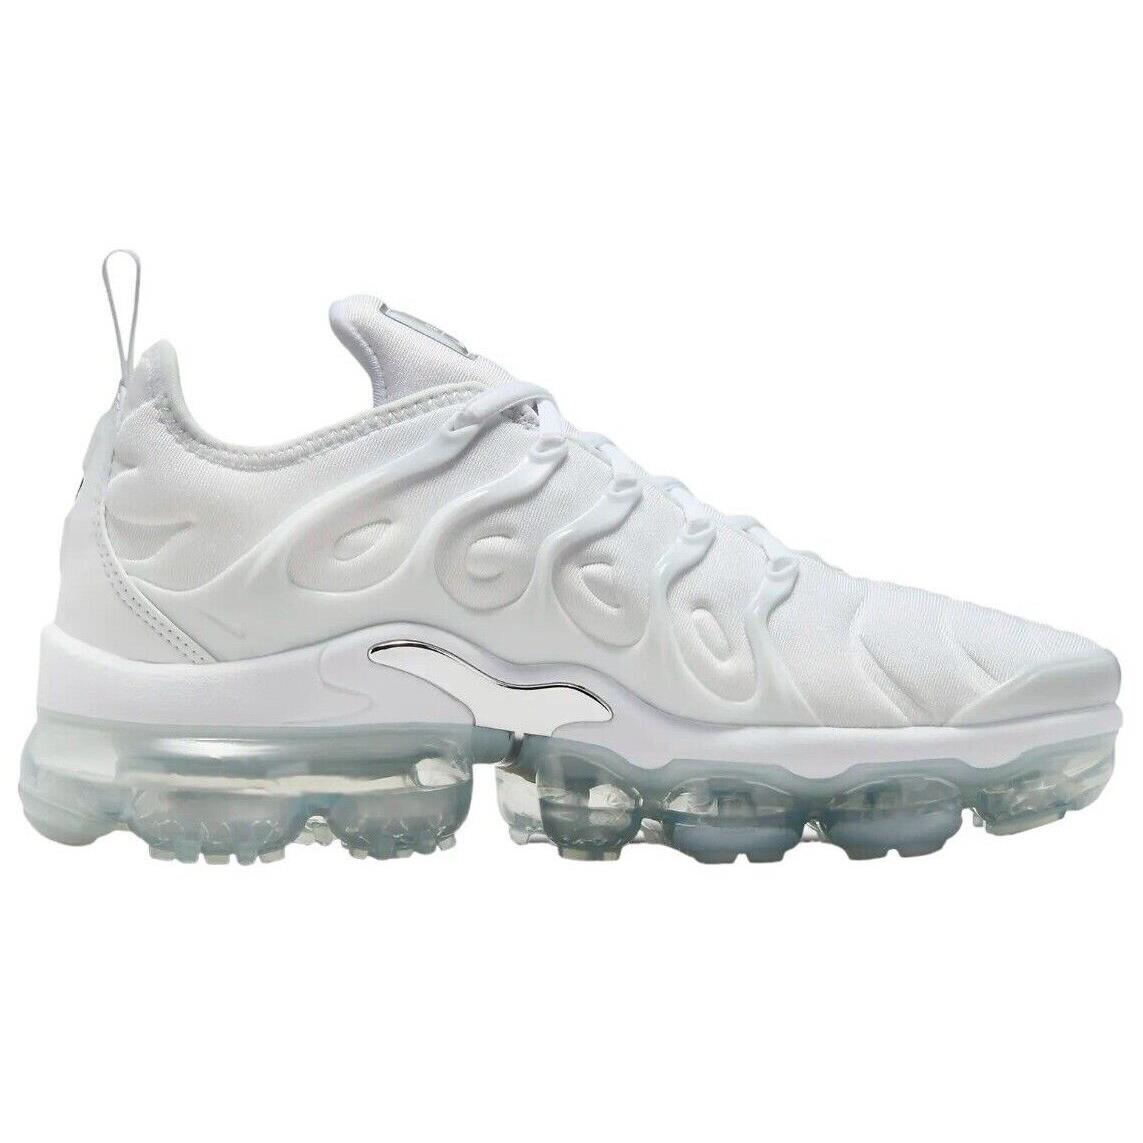 Nike Air Vapormax Plus Women`s Running Shoes All Colors US Sizes 6-11 - White/Metallic Silver